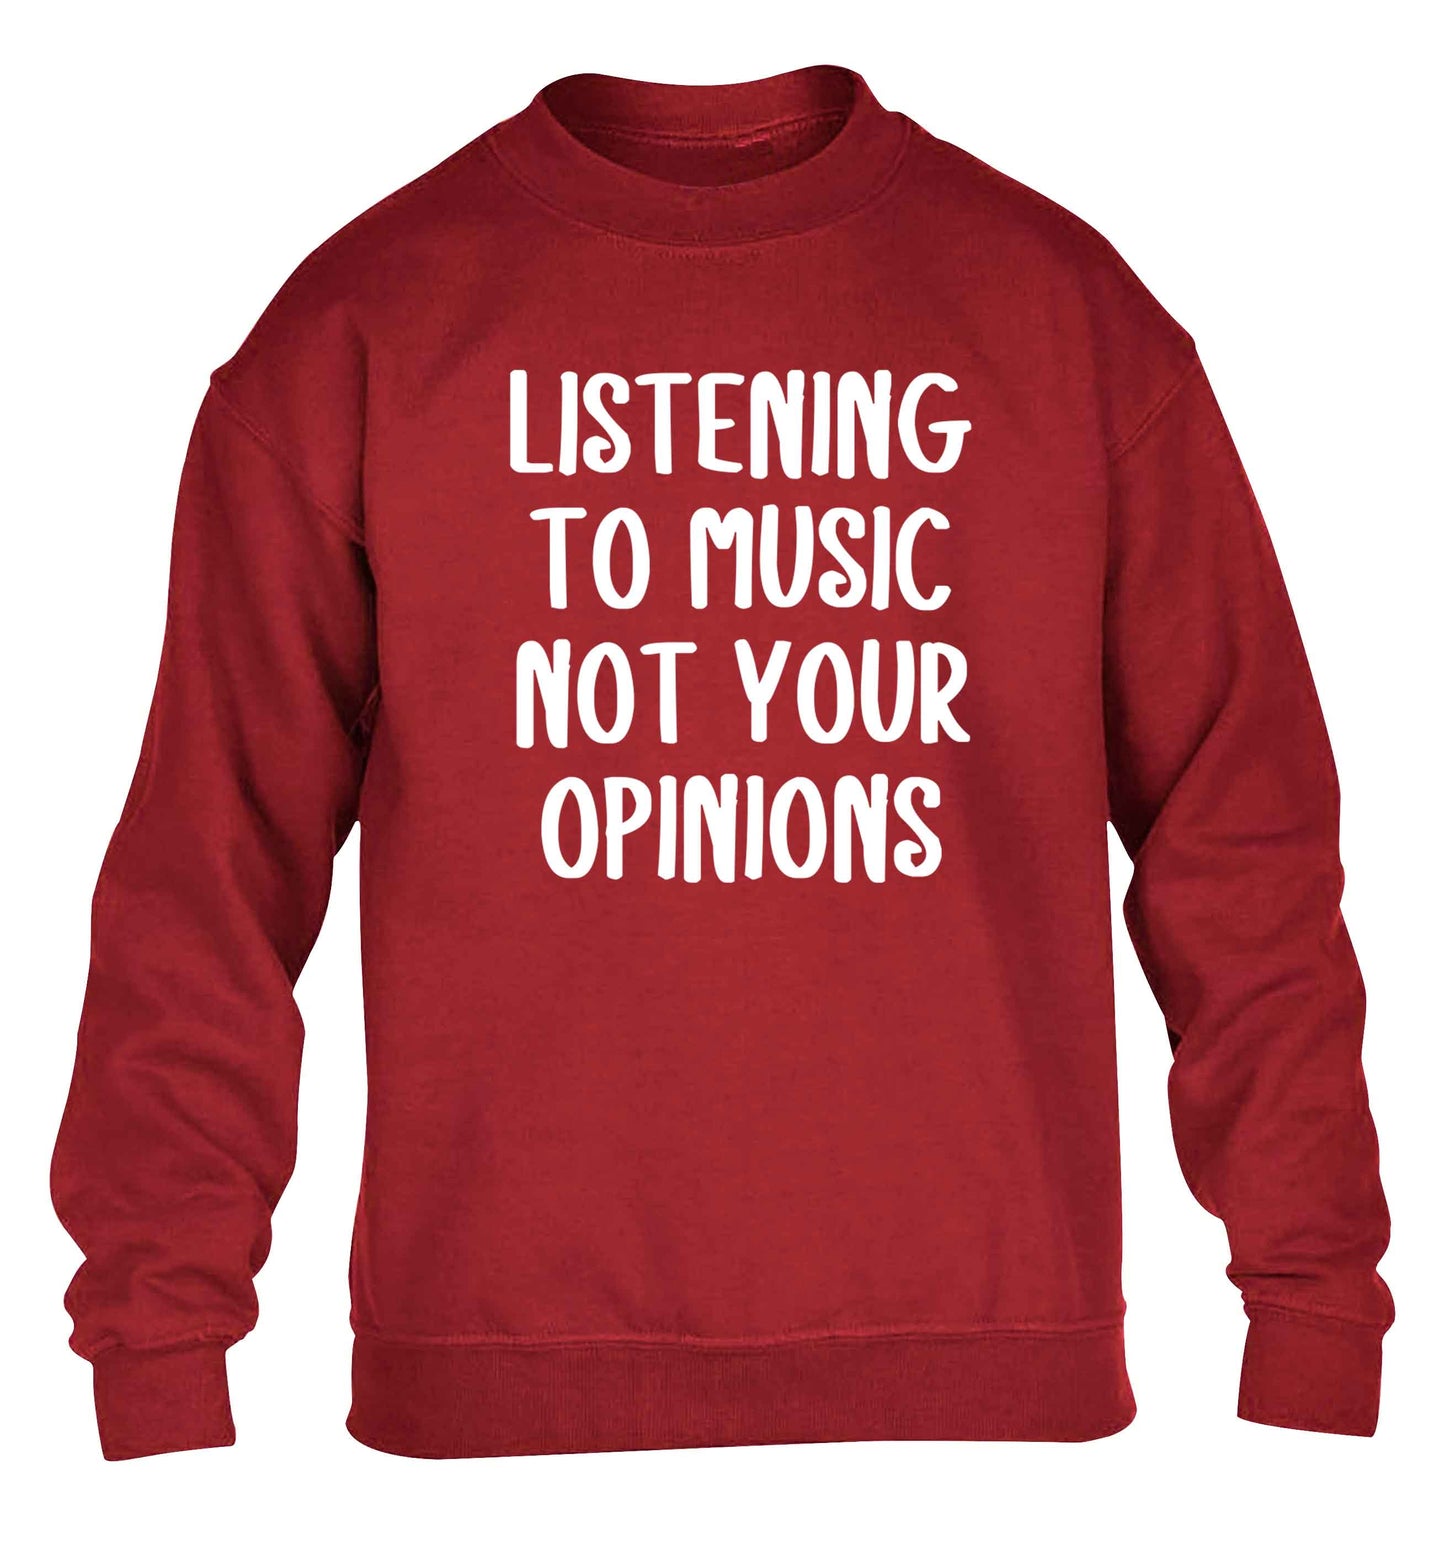 Listening to music not your opinions children's grey sweater 12-13 Years